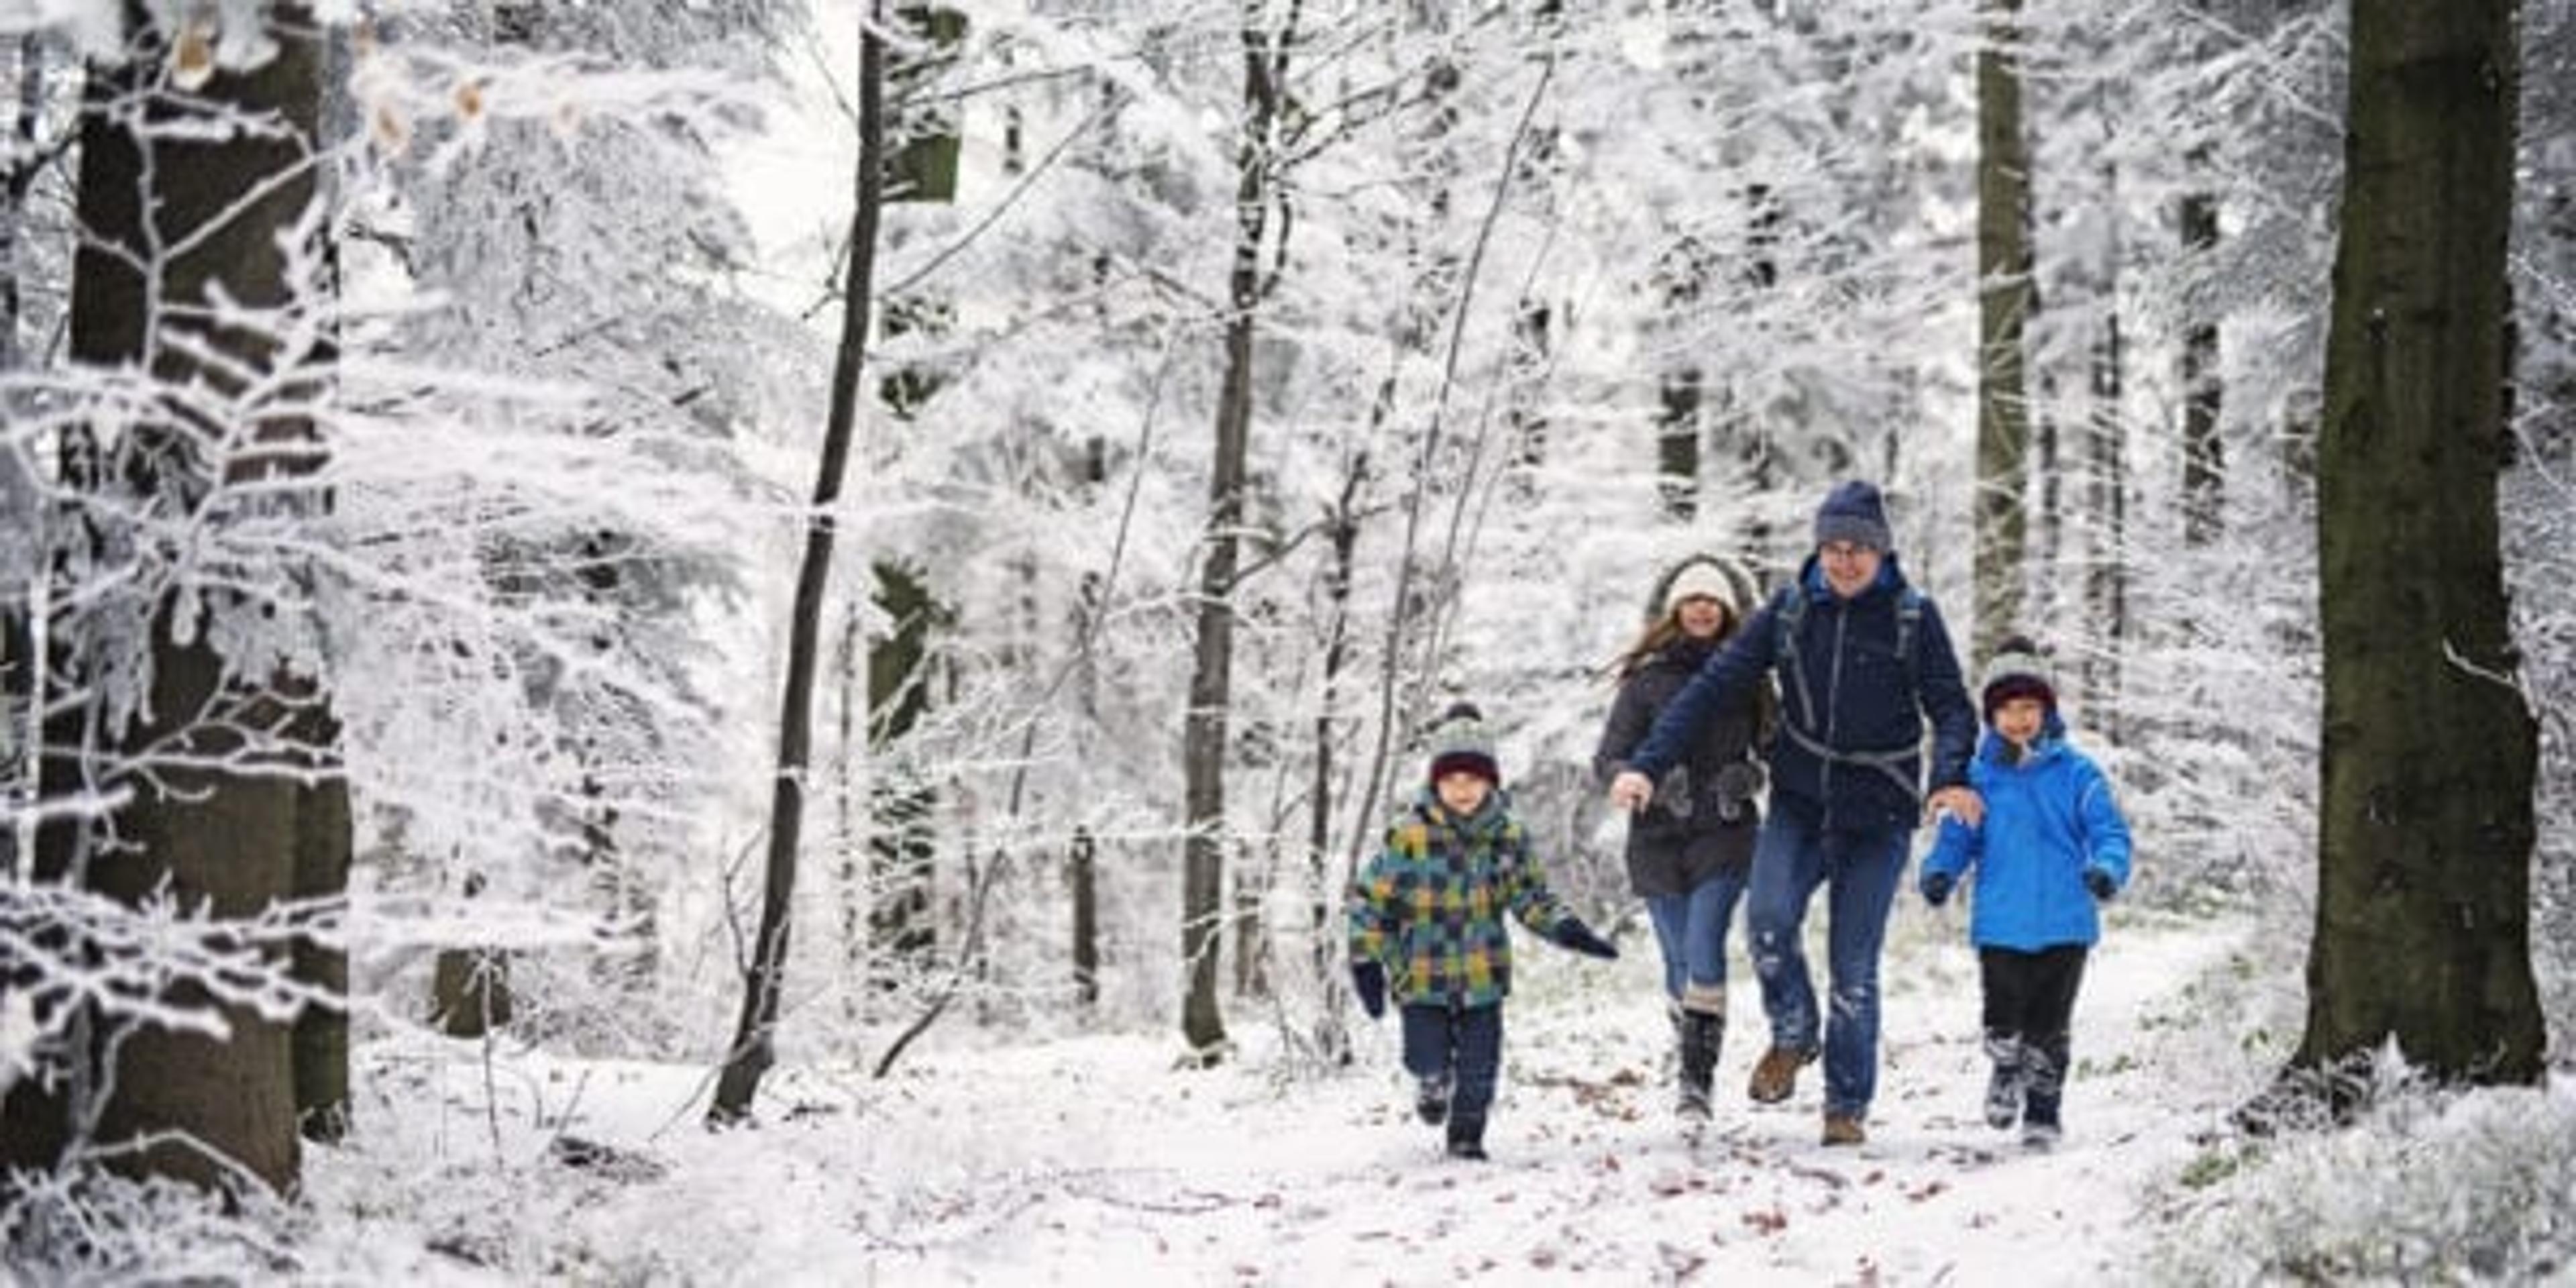 Father with three kids running in beautiful winter forest. The little girl is aged 10 and her brothers are aged 7. Cold winter day